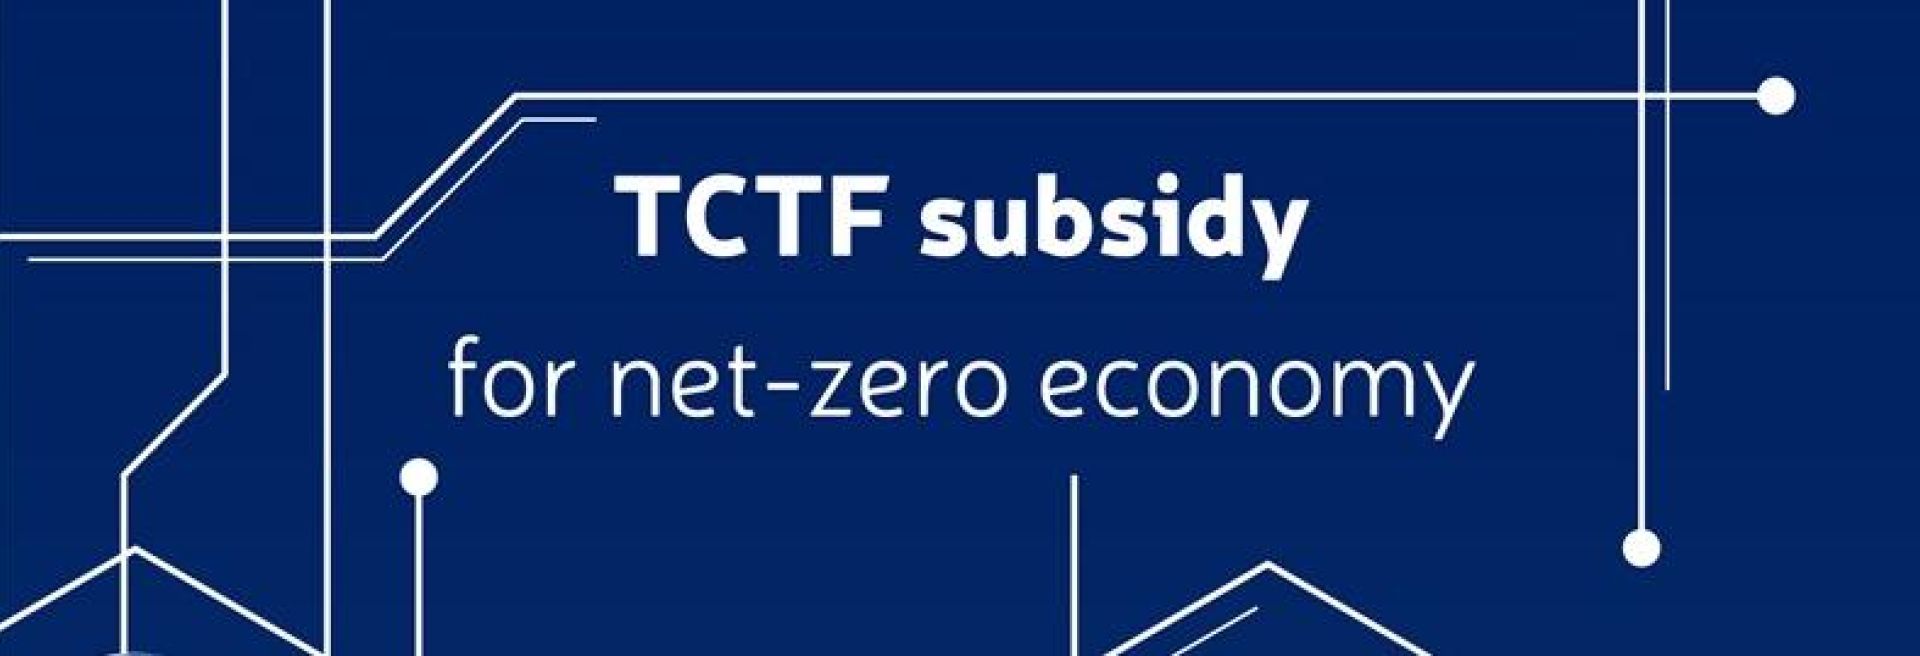 Introduction of a new subsidy scheme to accelerate the green transition (TCTF subsidy)